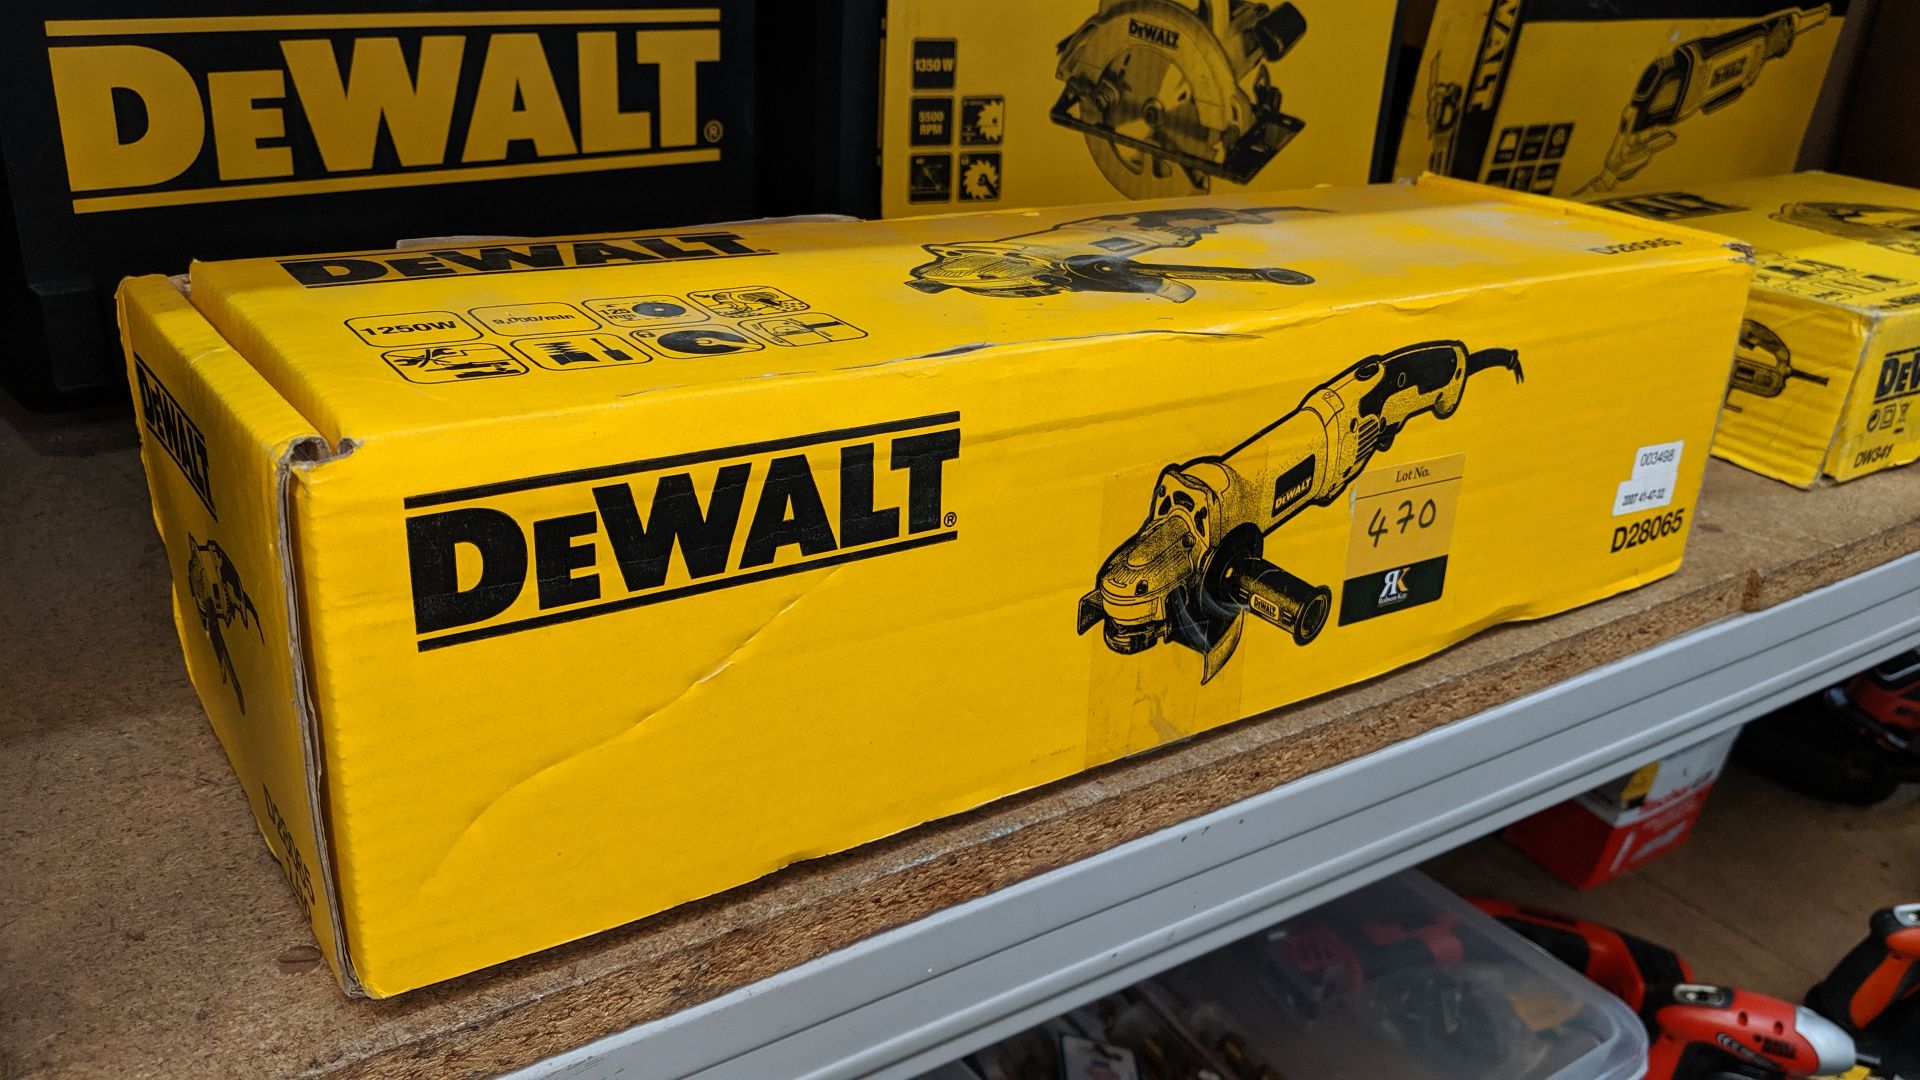 DeWalt D28065 angle grinder, 125mm, 1250W This is one of a number of lots from Rochdale Re-Tool